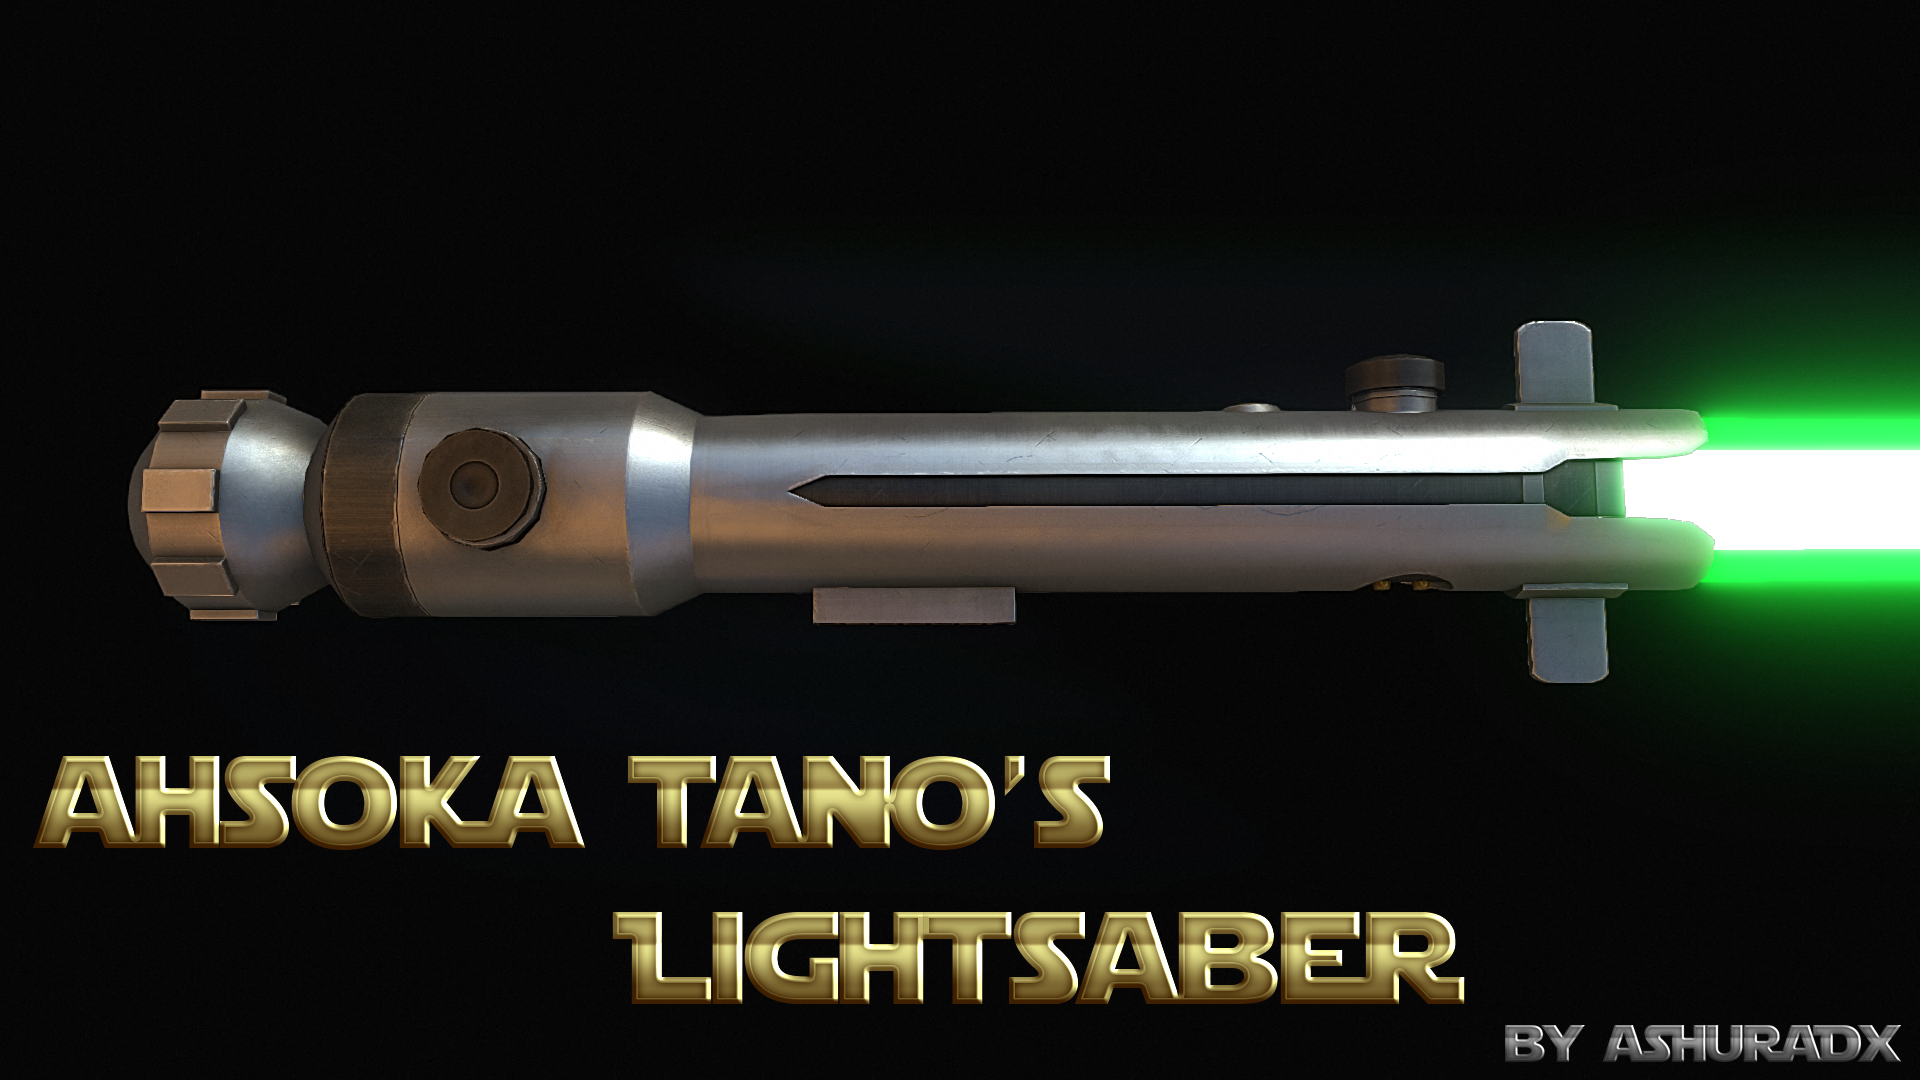 More information about "Ahsoka Tano's Lightsaber - Redone"